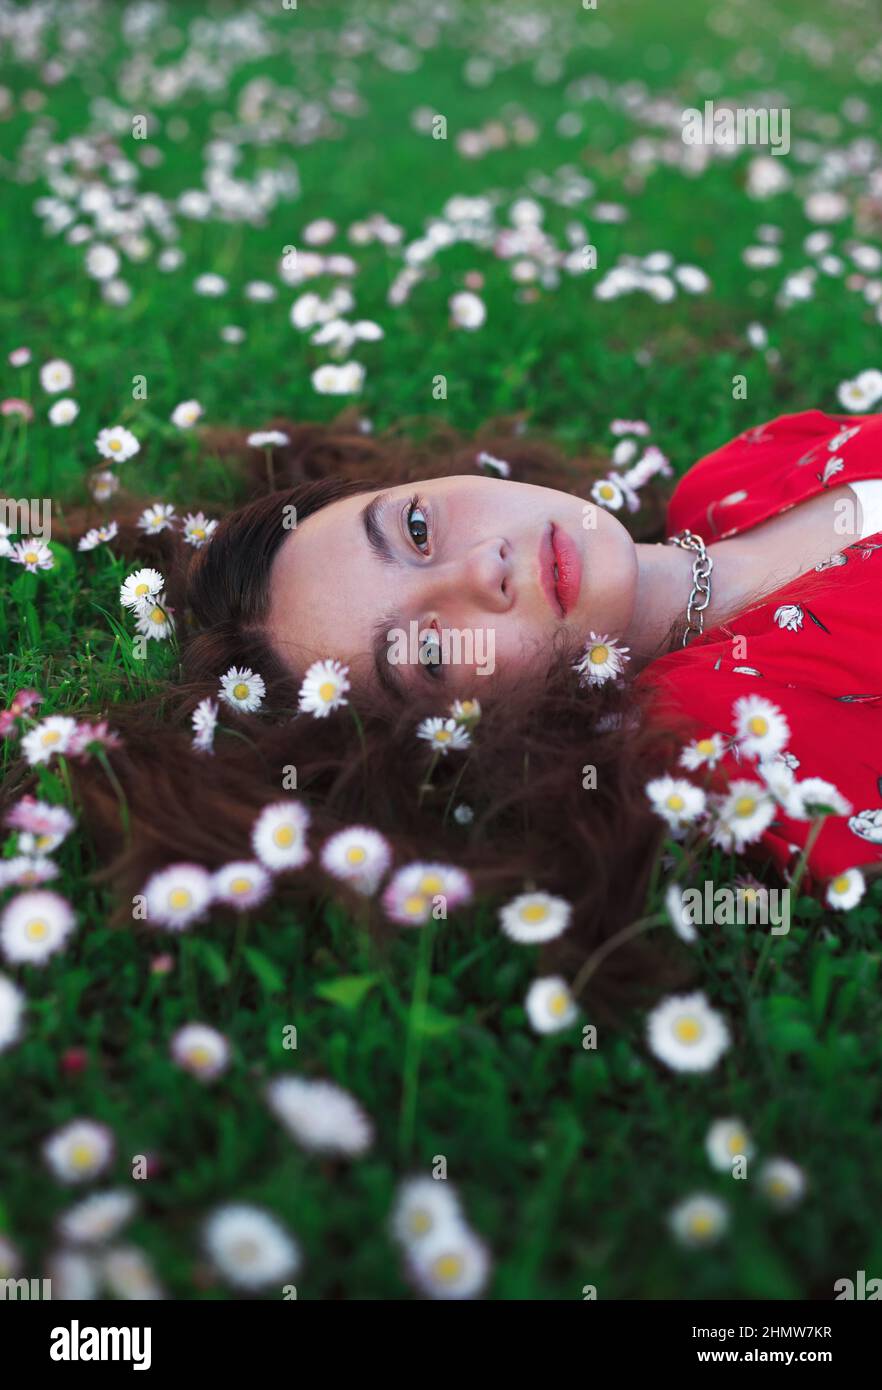 Young beautiful girl in red dress is resting on fresh spring grass with little white flowers. Stock Photo